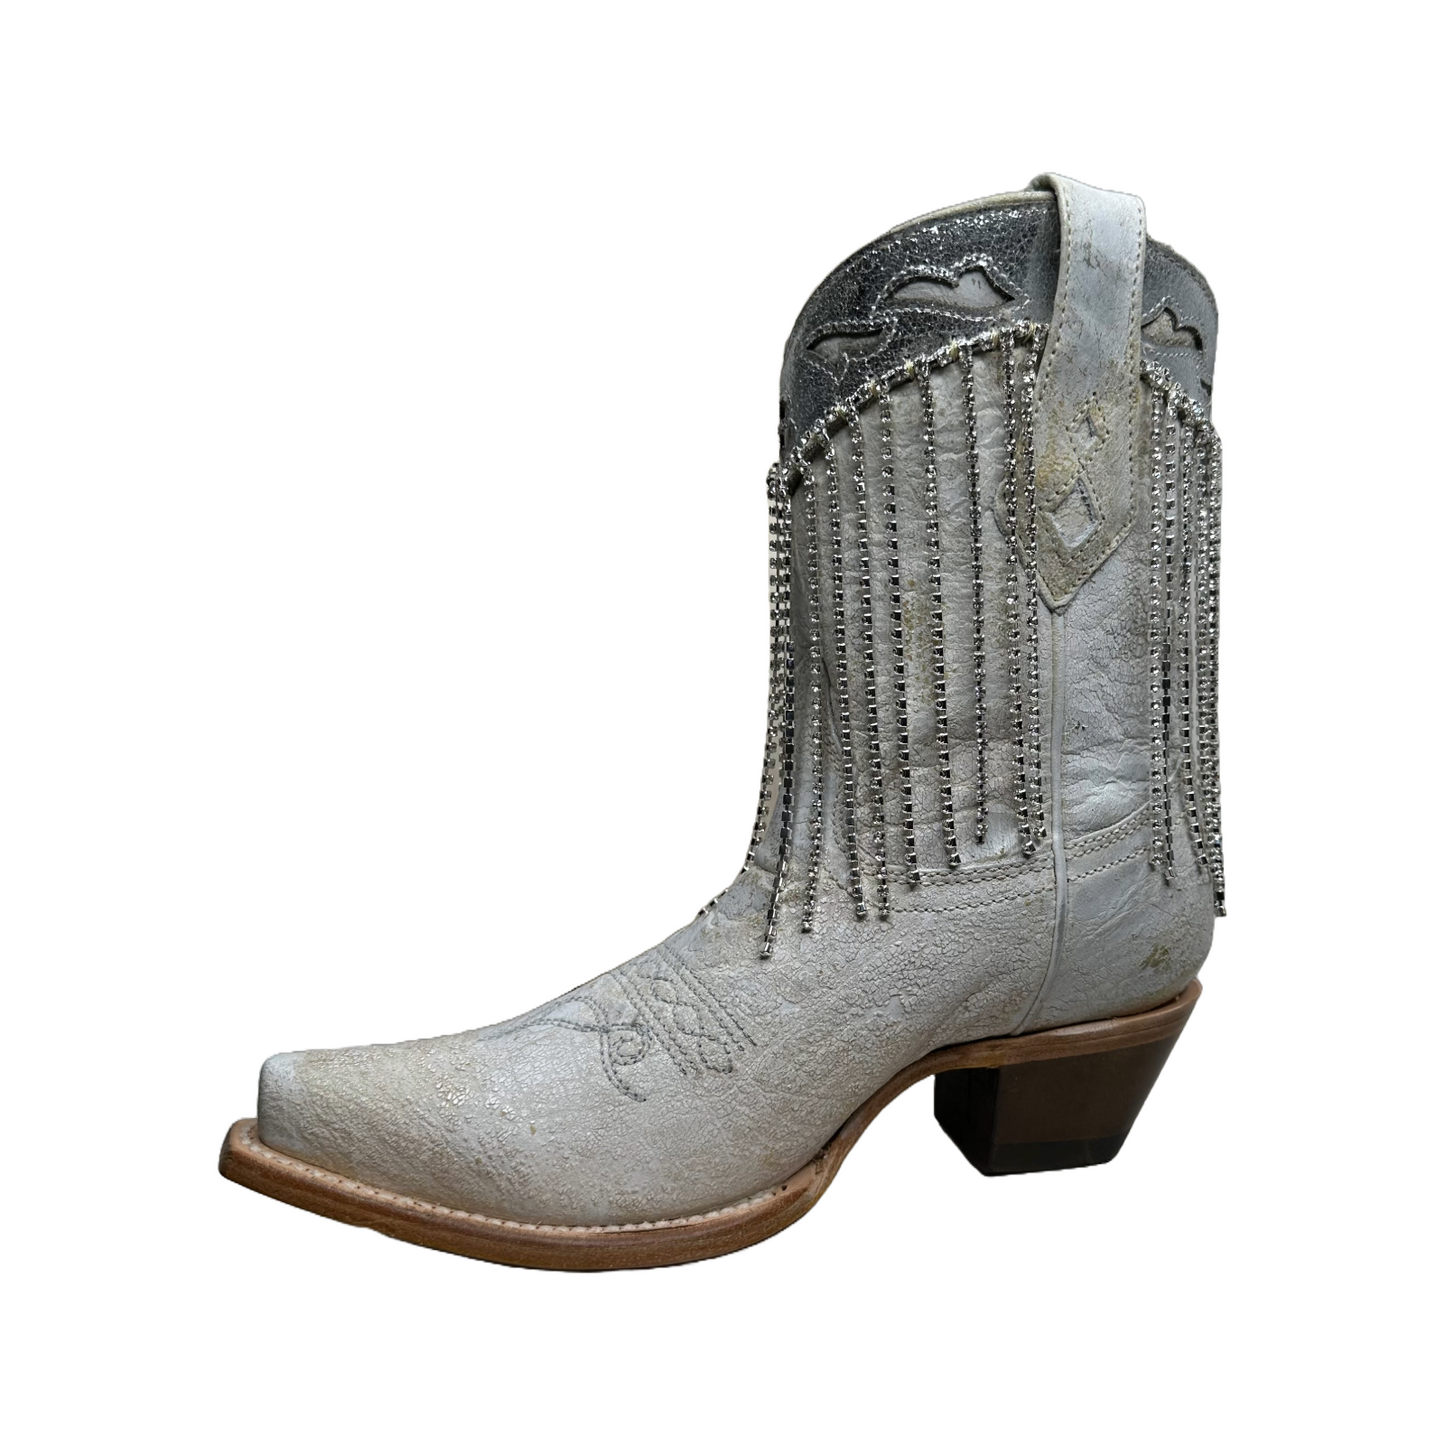 Corral Ladies White-Silver Overlay & Fringe Snip Toe Ankle Boots Z5250